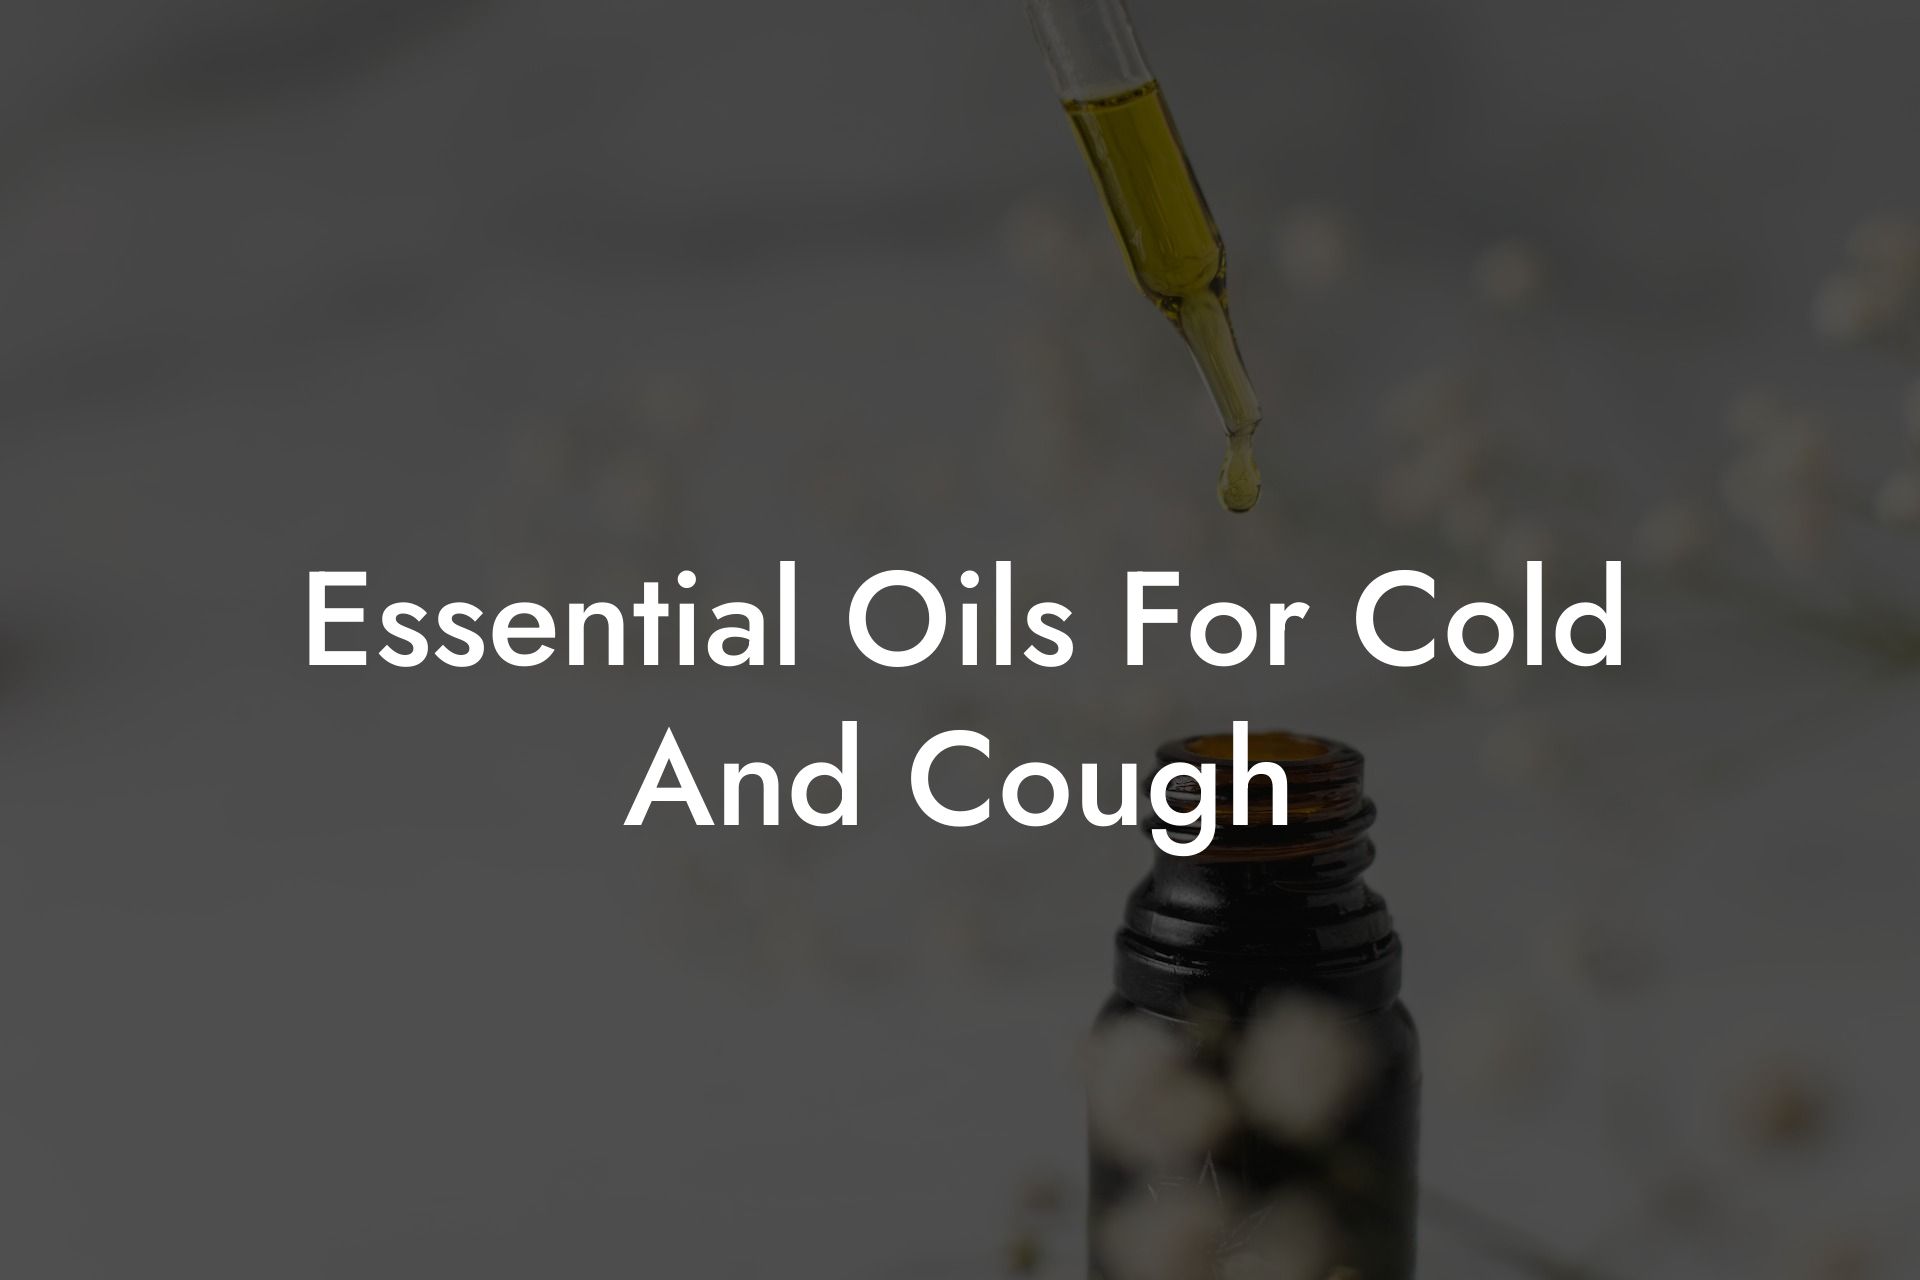 Essential Oils For Cold And Cough